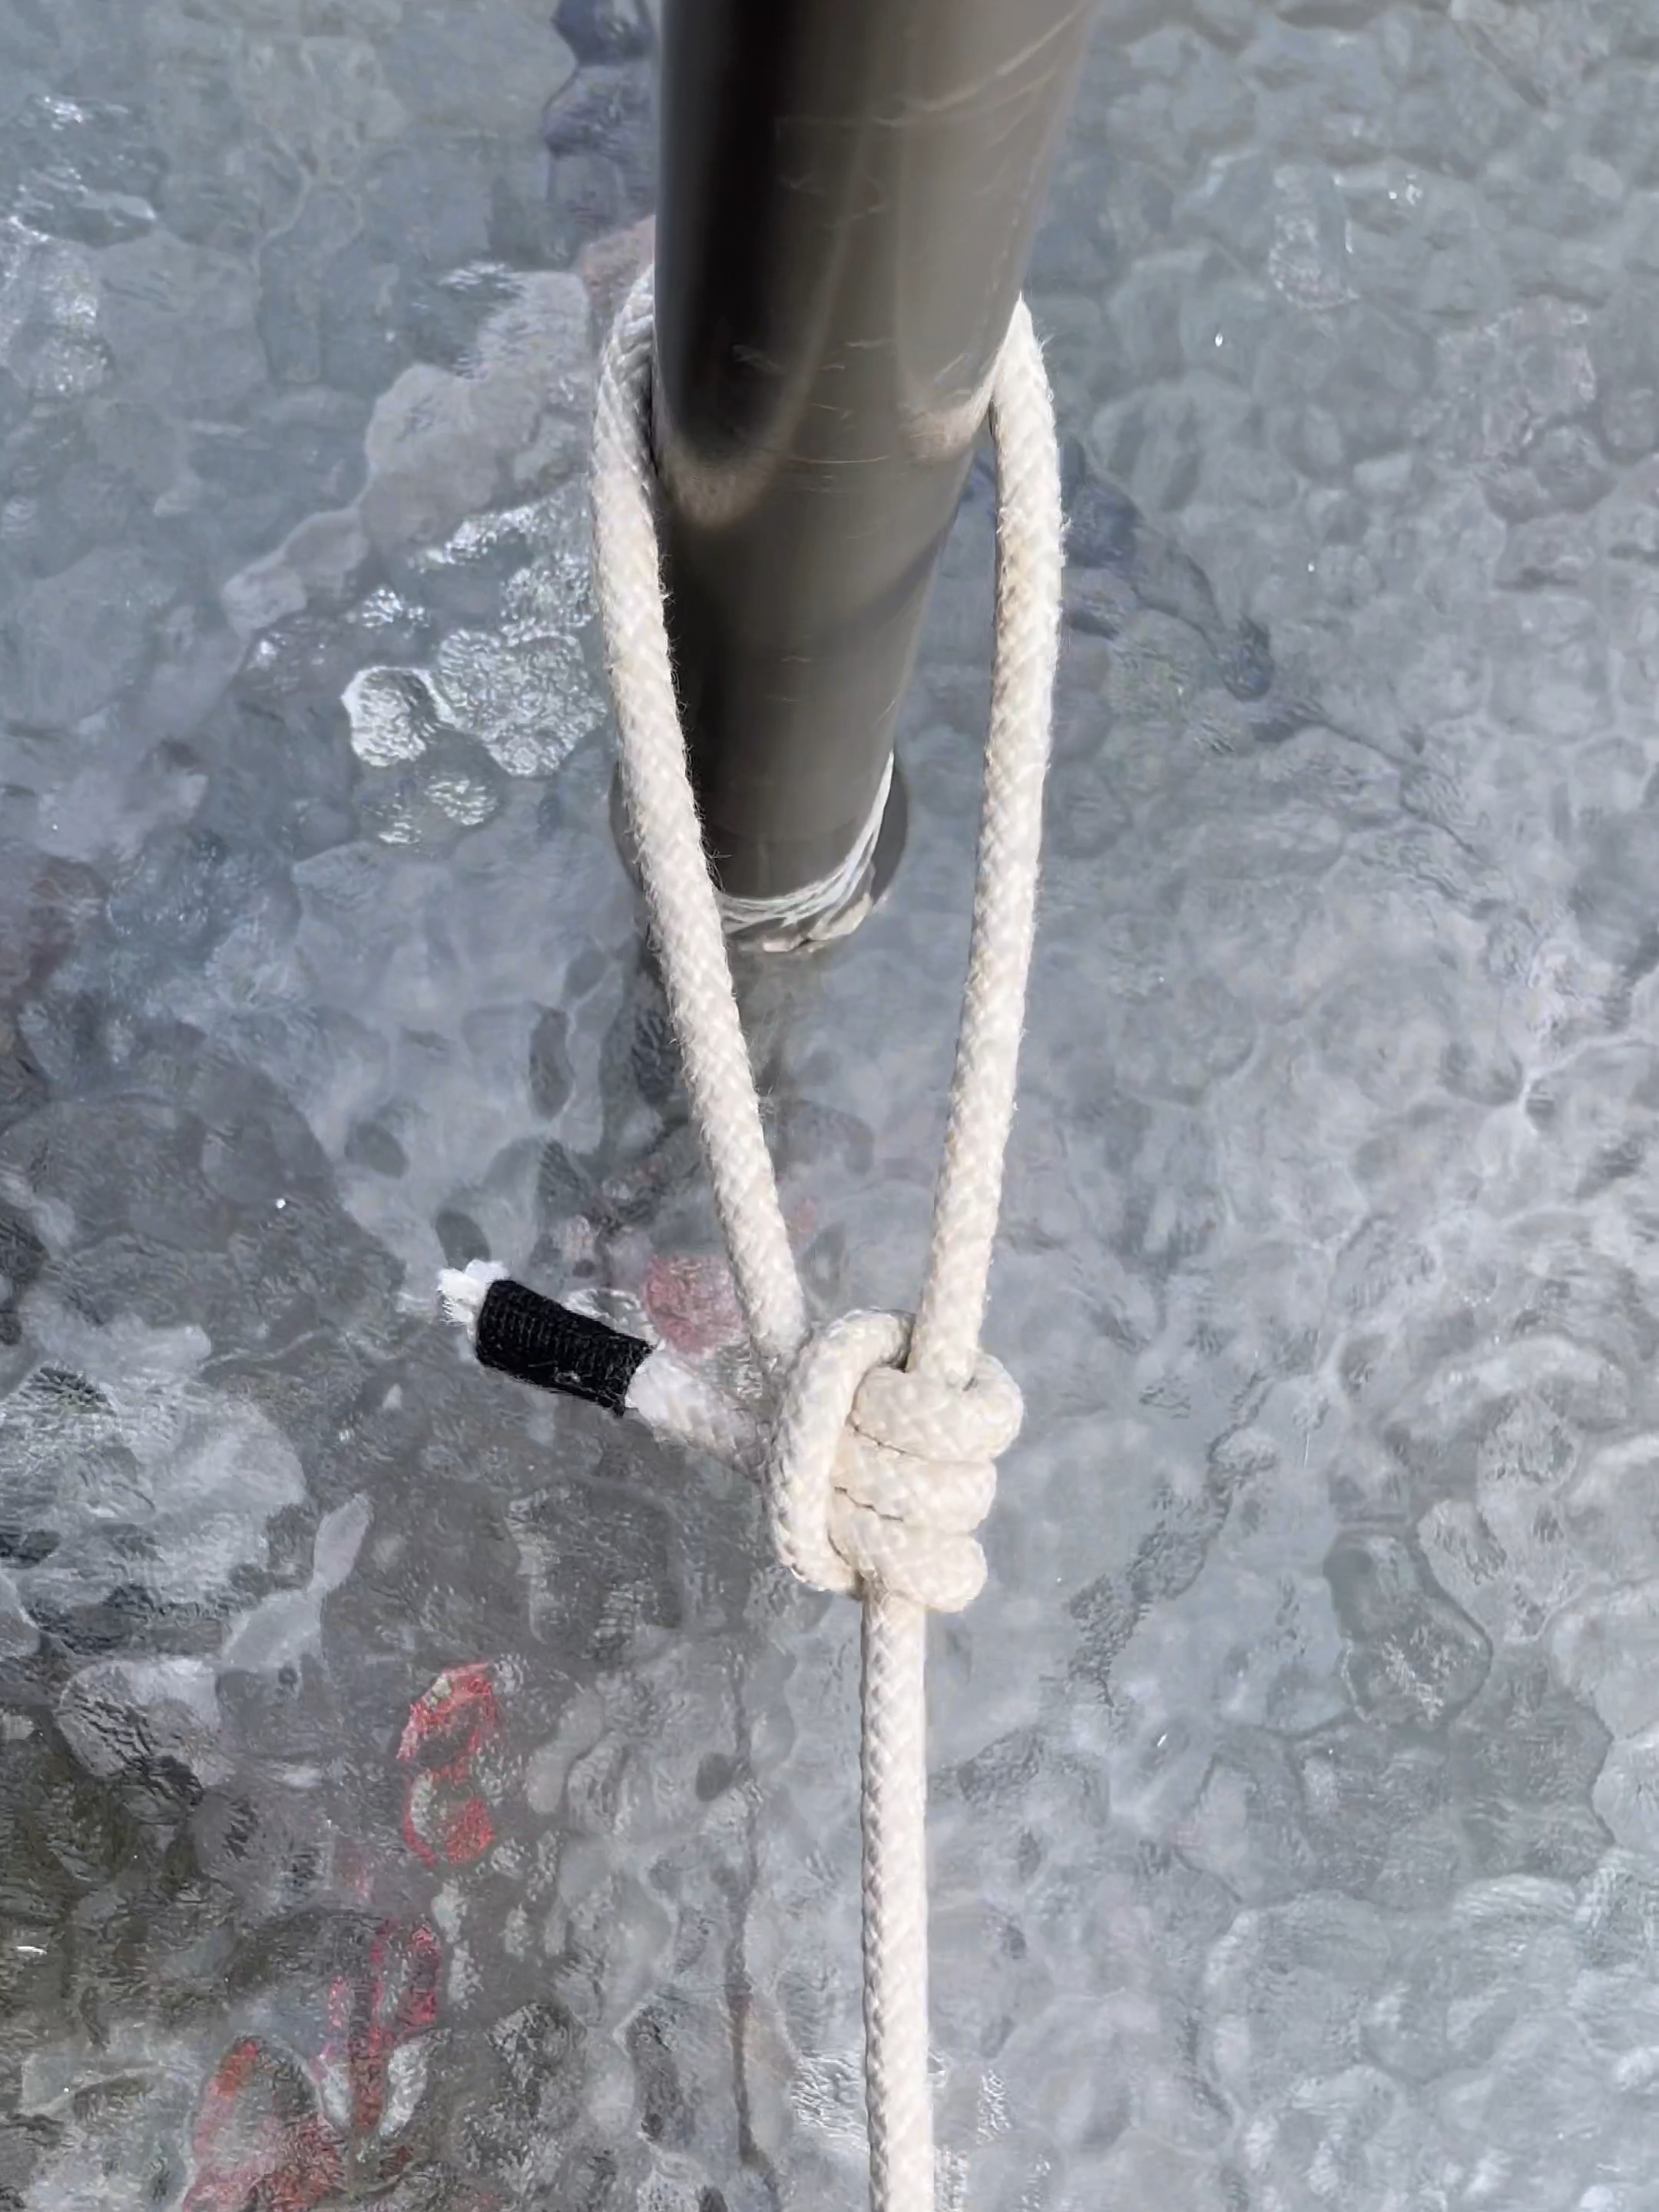 Best Knot for Camping - Taut Line Hitch - Easily Adjust Tension #knots #knot #rope #ropes #ropework #camping #tautline #lifeskills #lifehacks #howtotieaknot #knottying #knotting